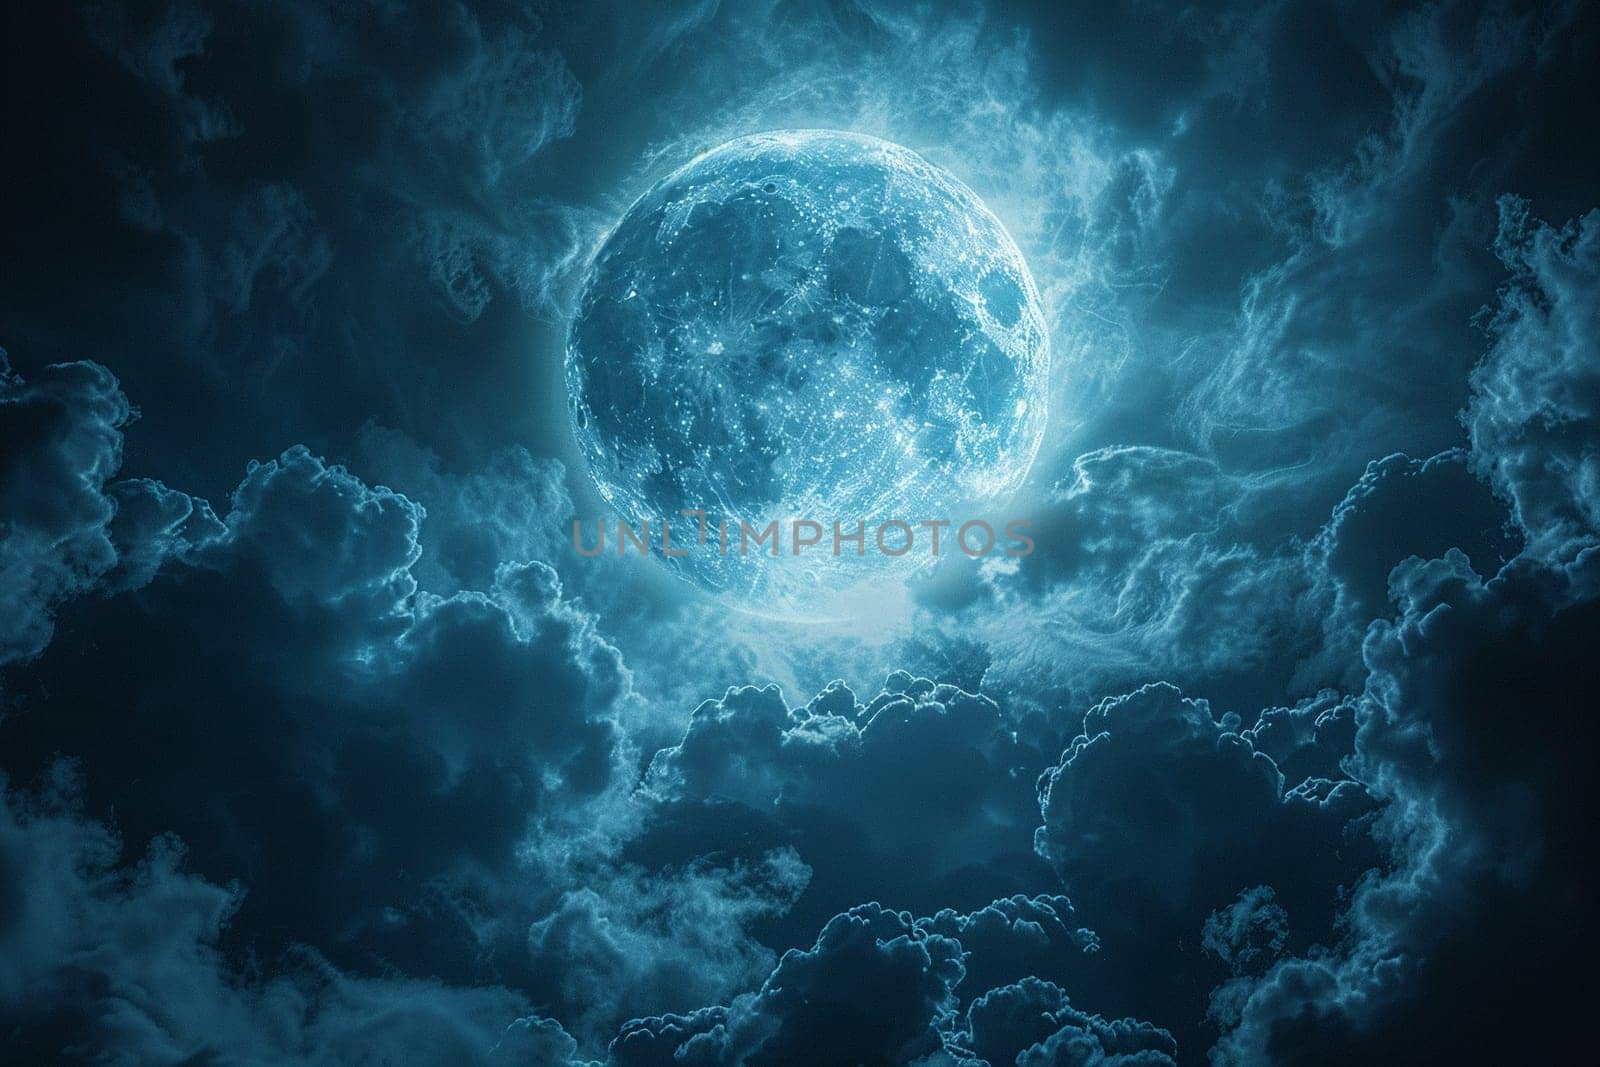 Moonlit clouds in a night sky by Benzoix